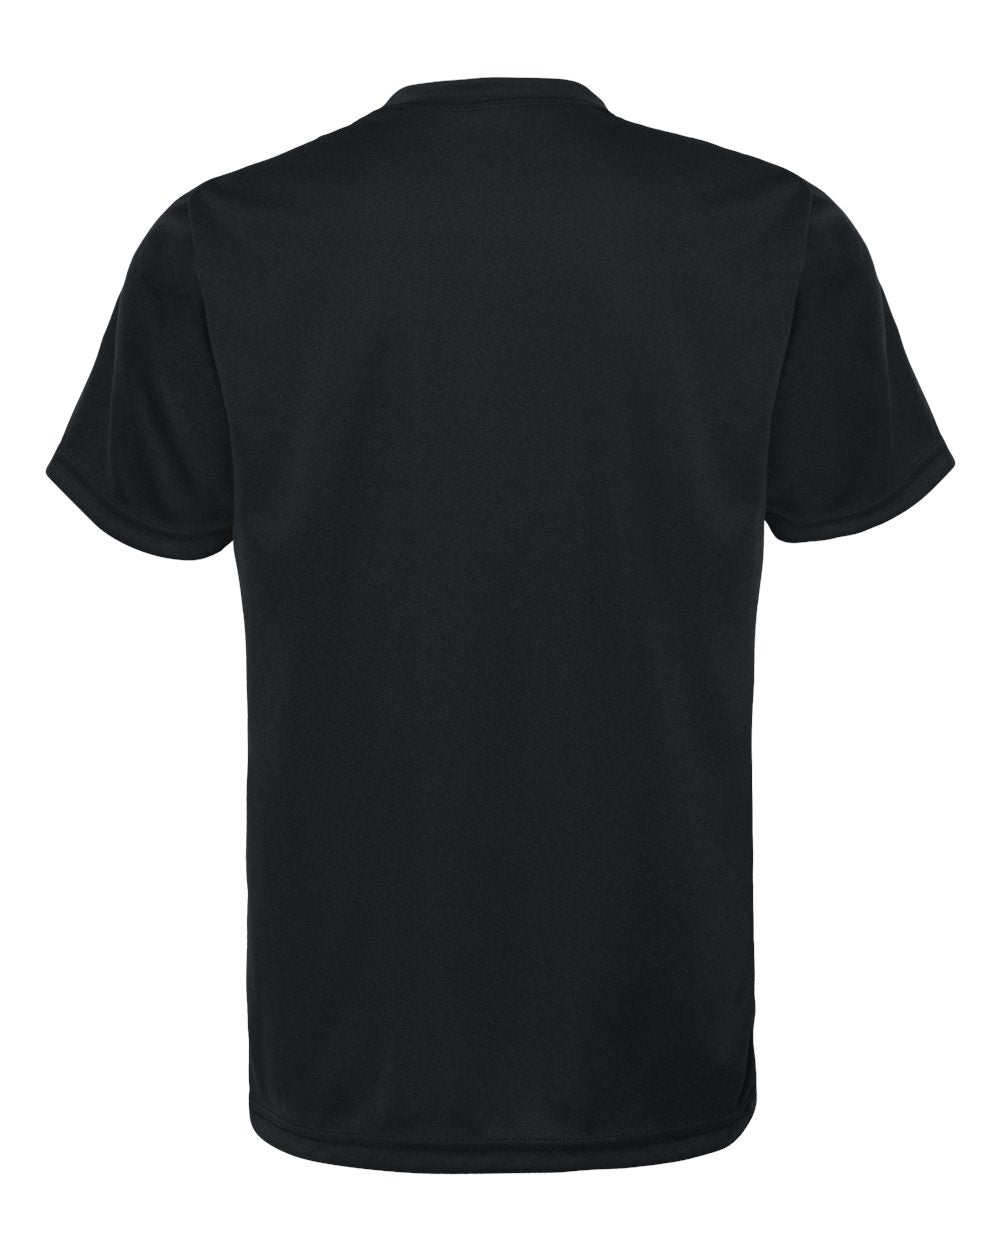 C2 Sport Youth Performance T-Shirt 5200 #color_Black